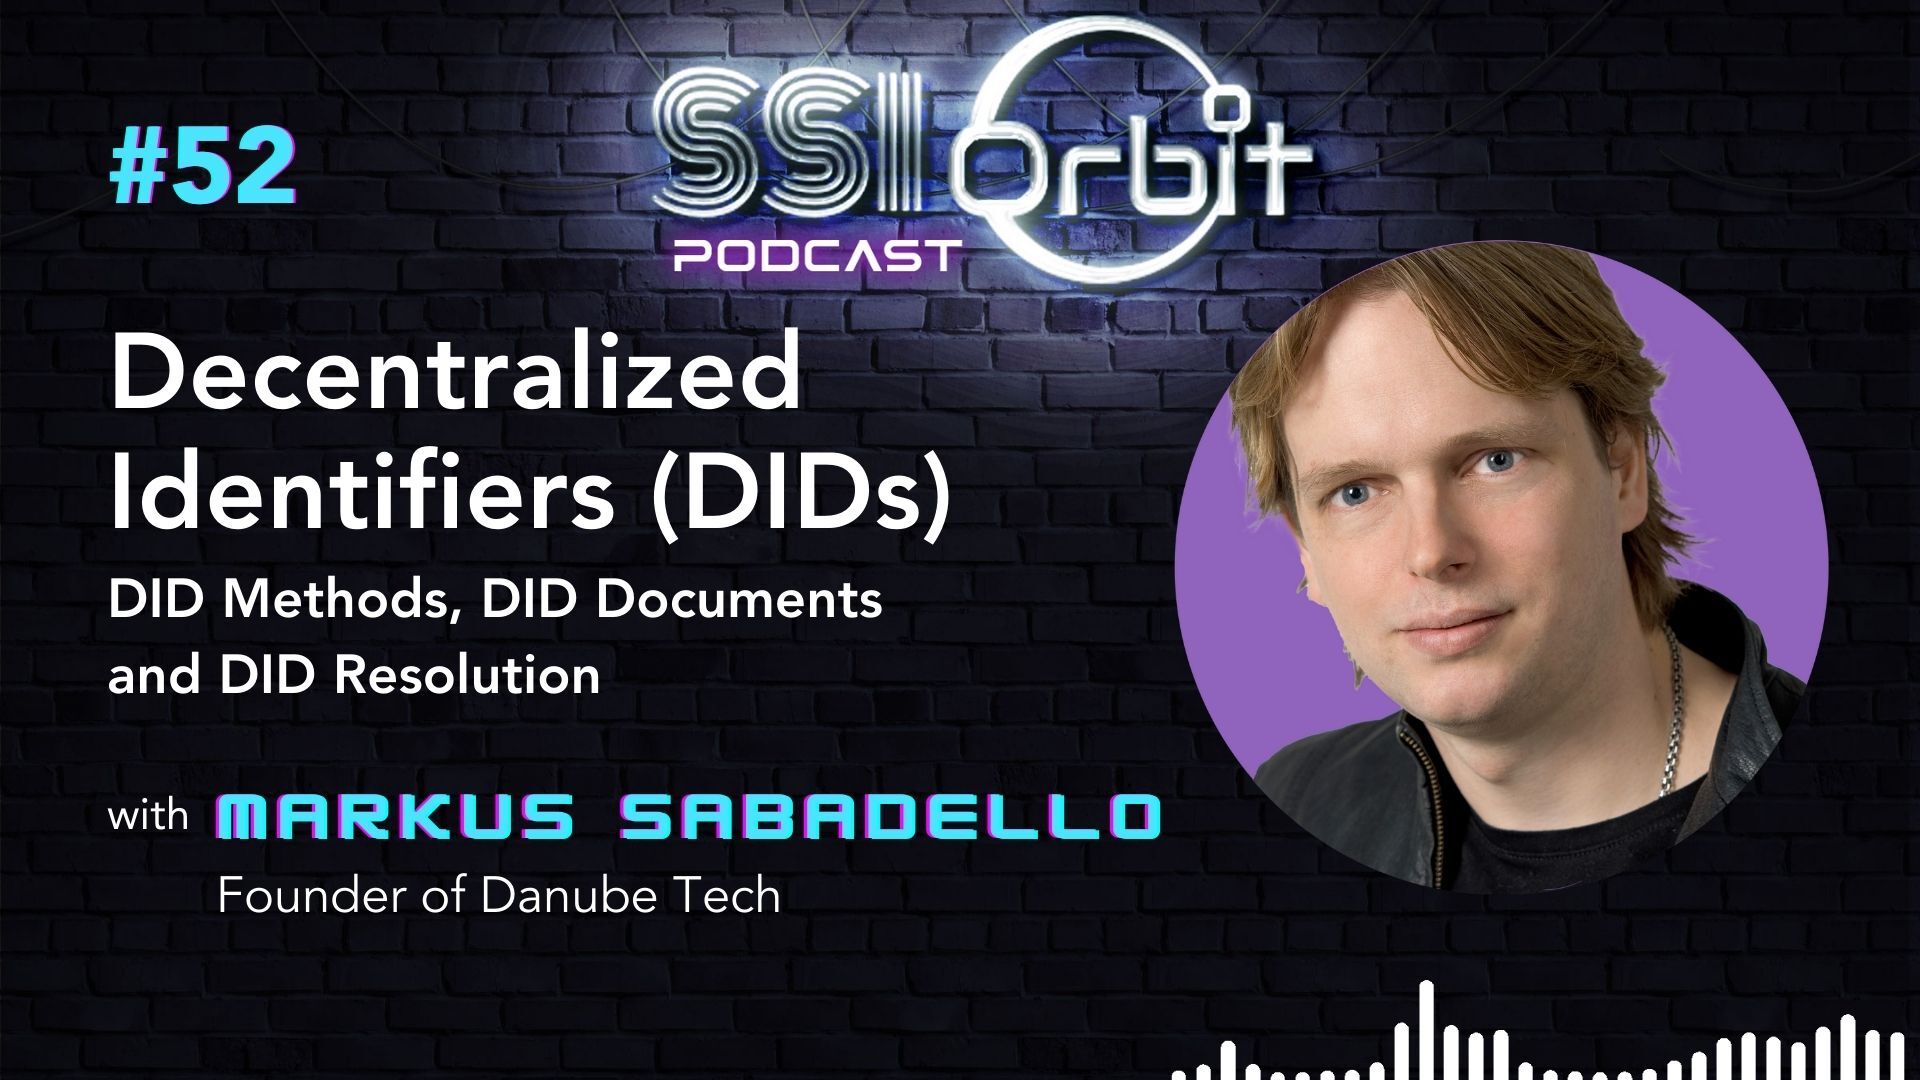 Decentralized Identifiers (DIDs): DID Methods, DID Documents and DID Resolution (with Markus Sabadello)